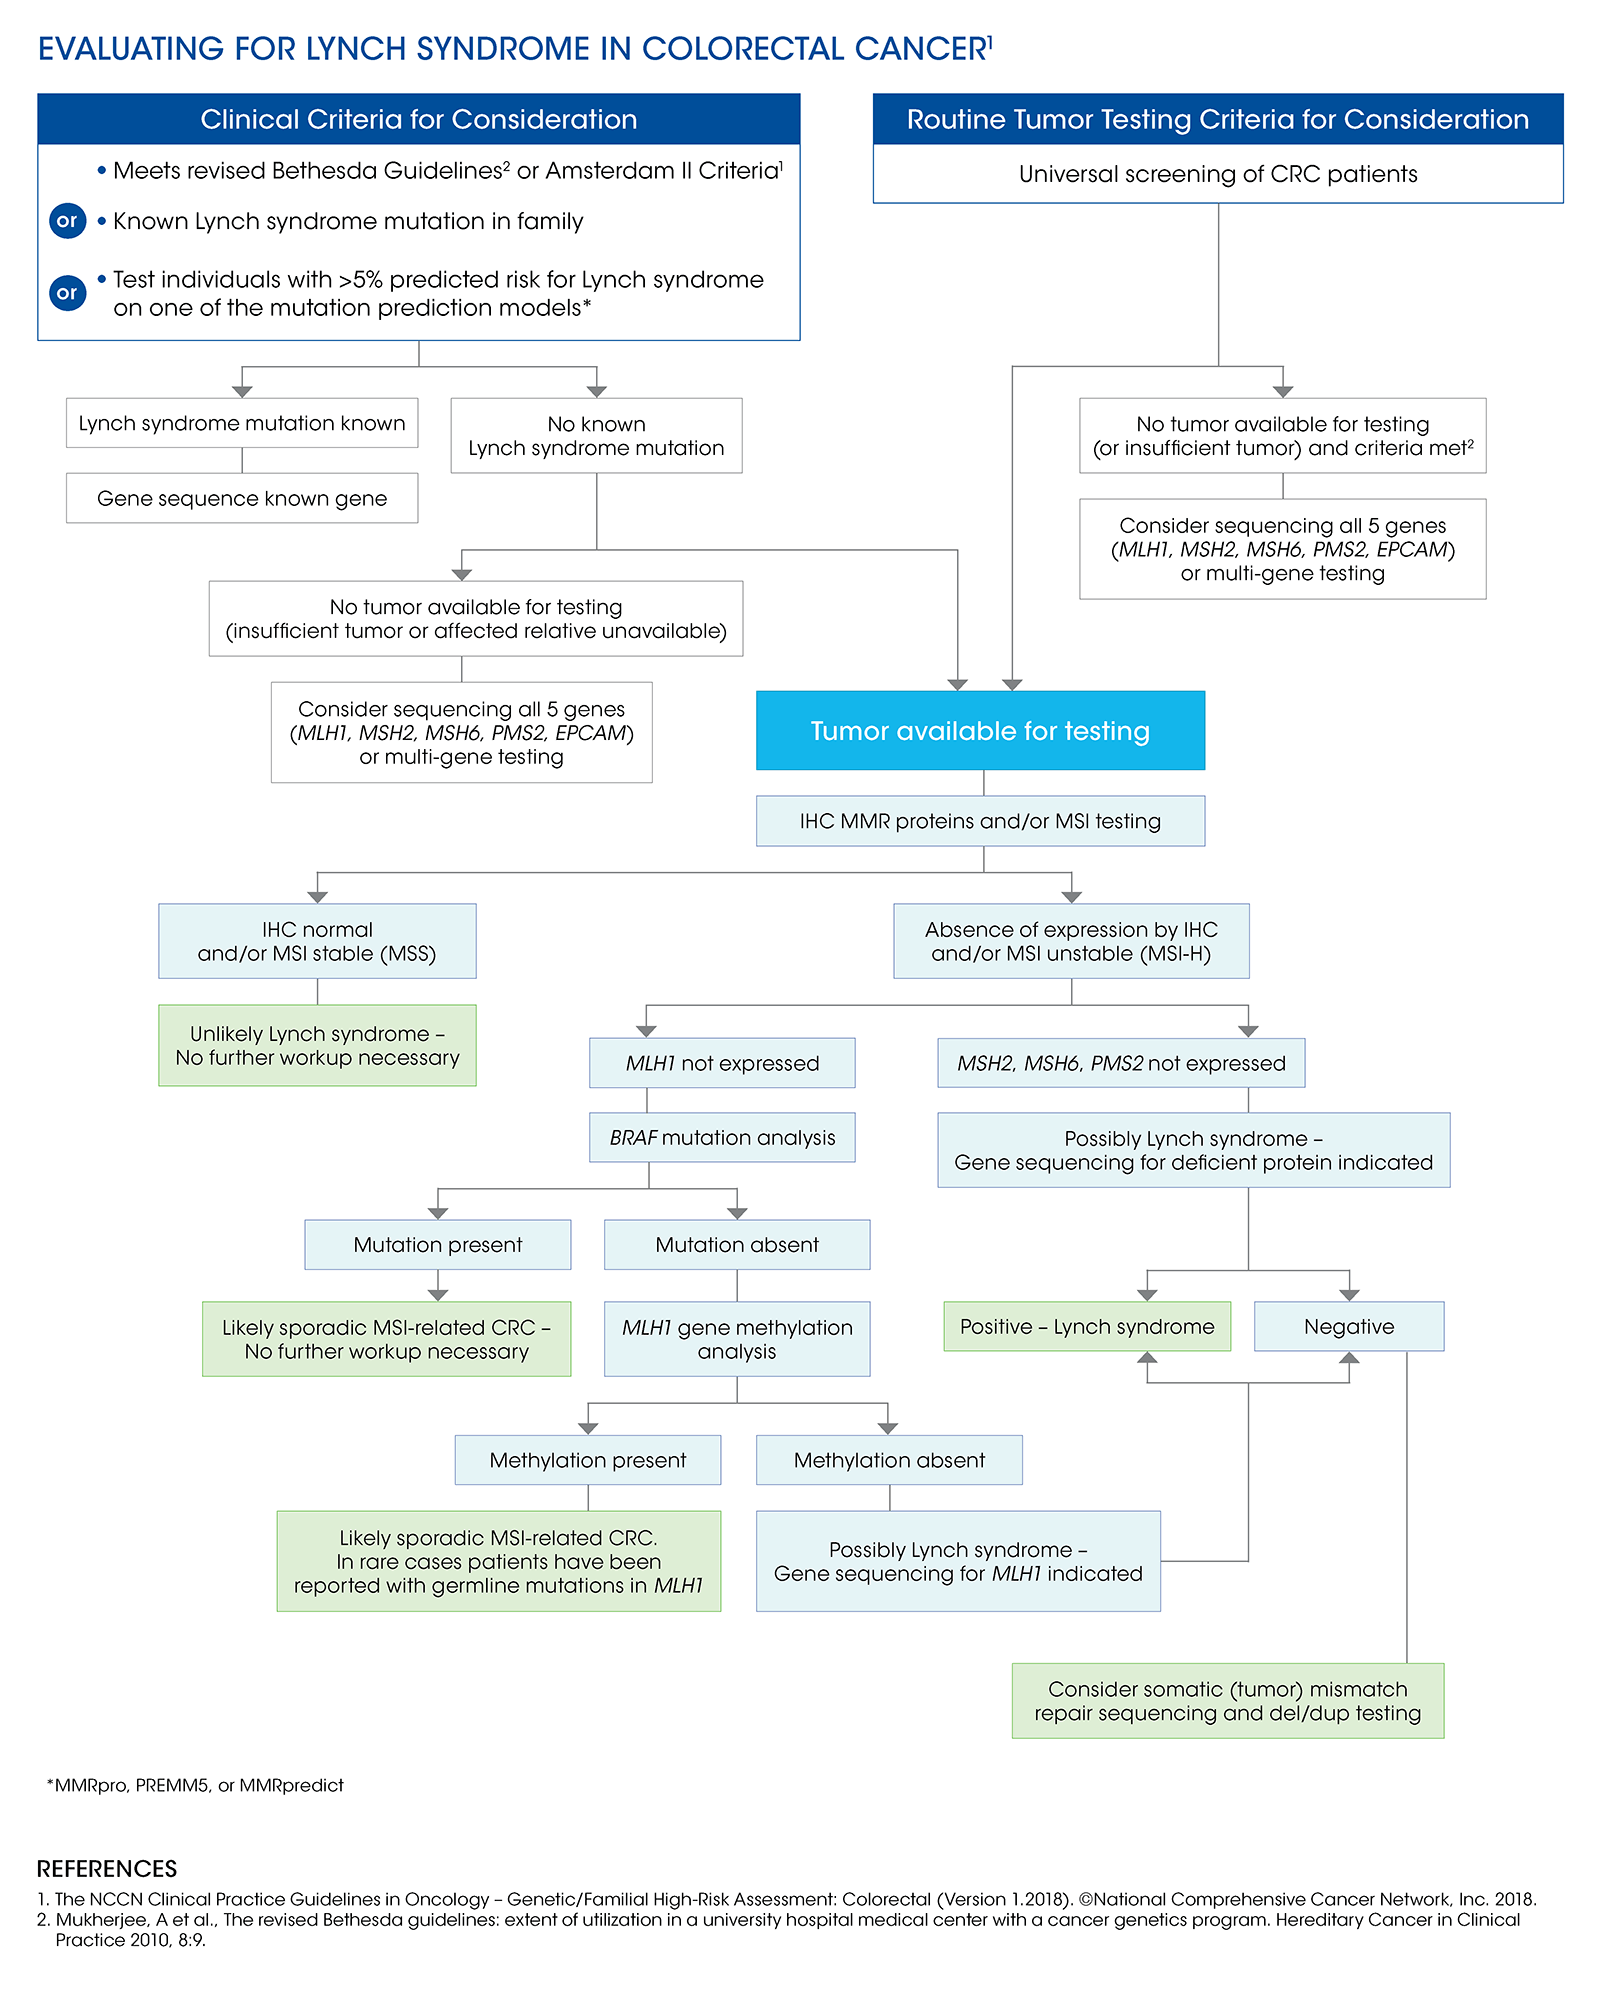 Eveluating for Lynch Syndrome in Colorectal Cancer Flowchart